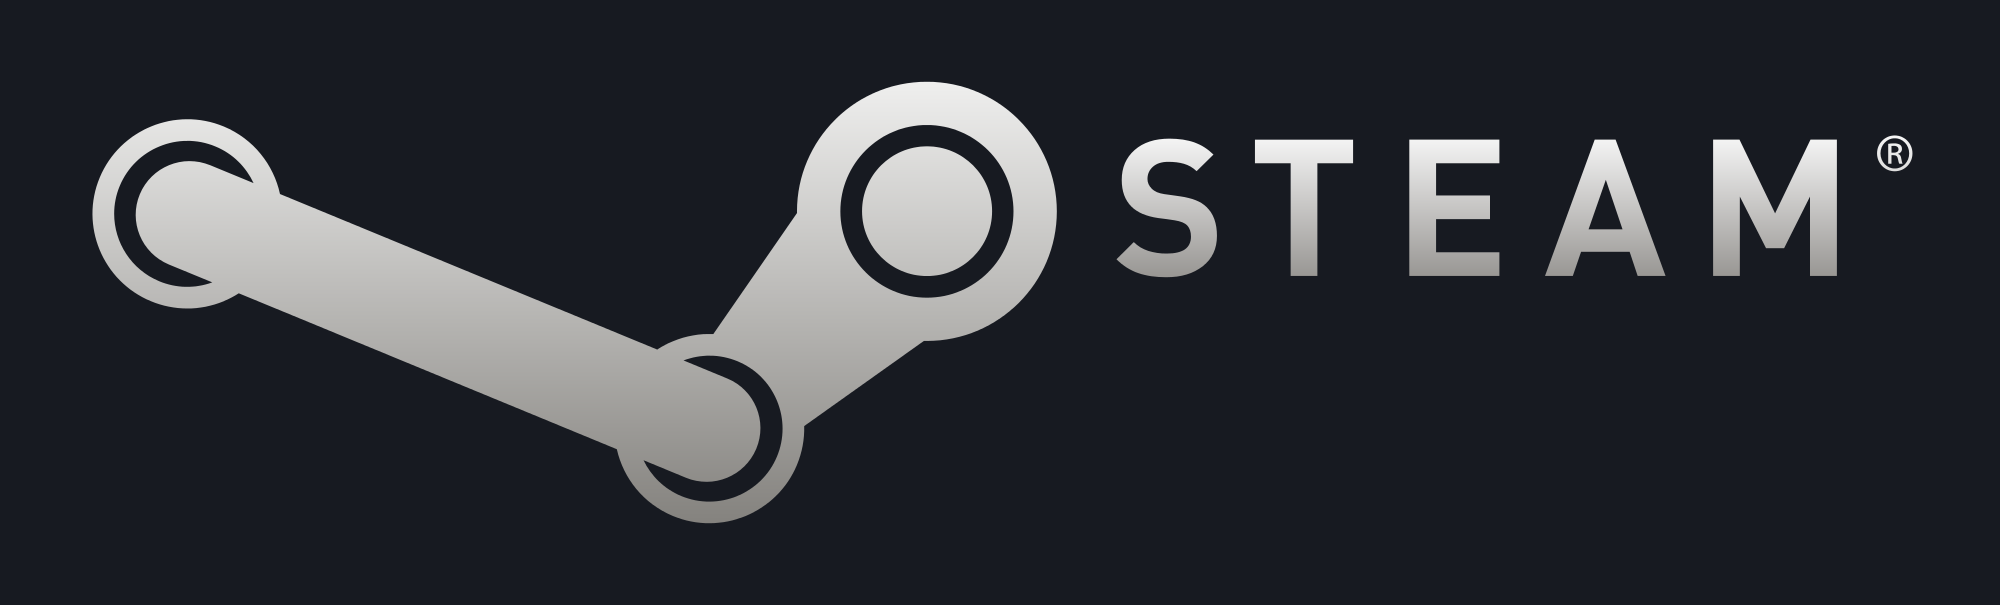 Steam svg #20, Download drawings